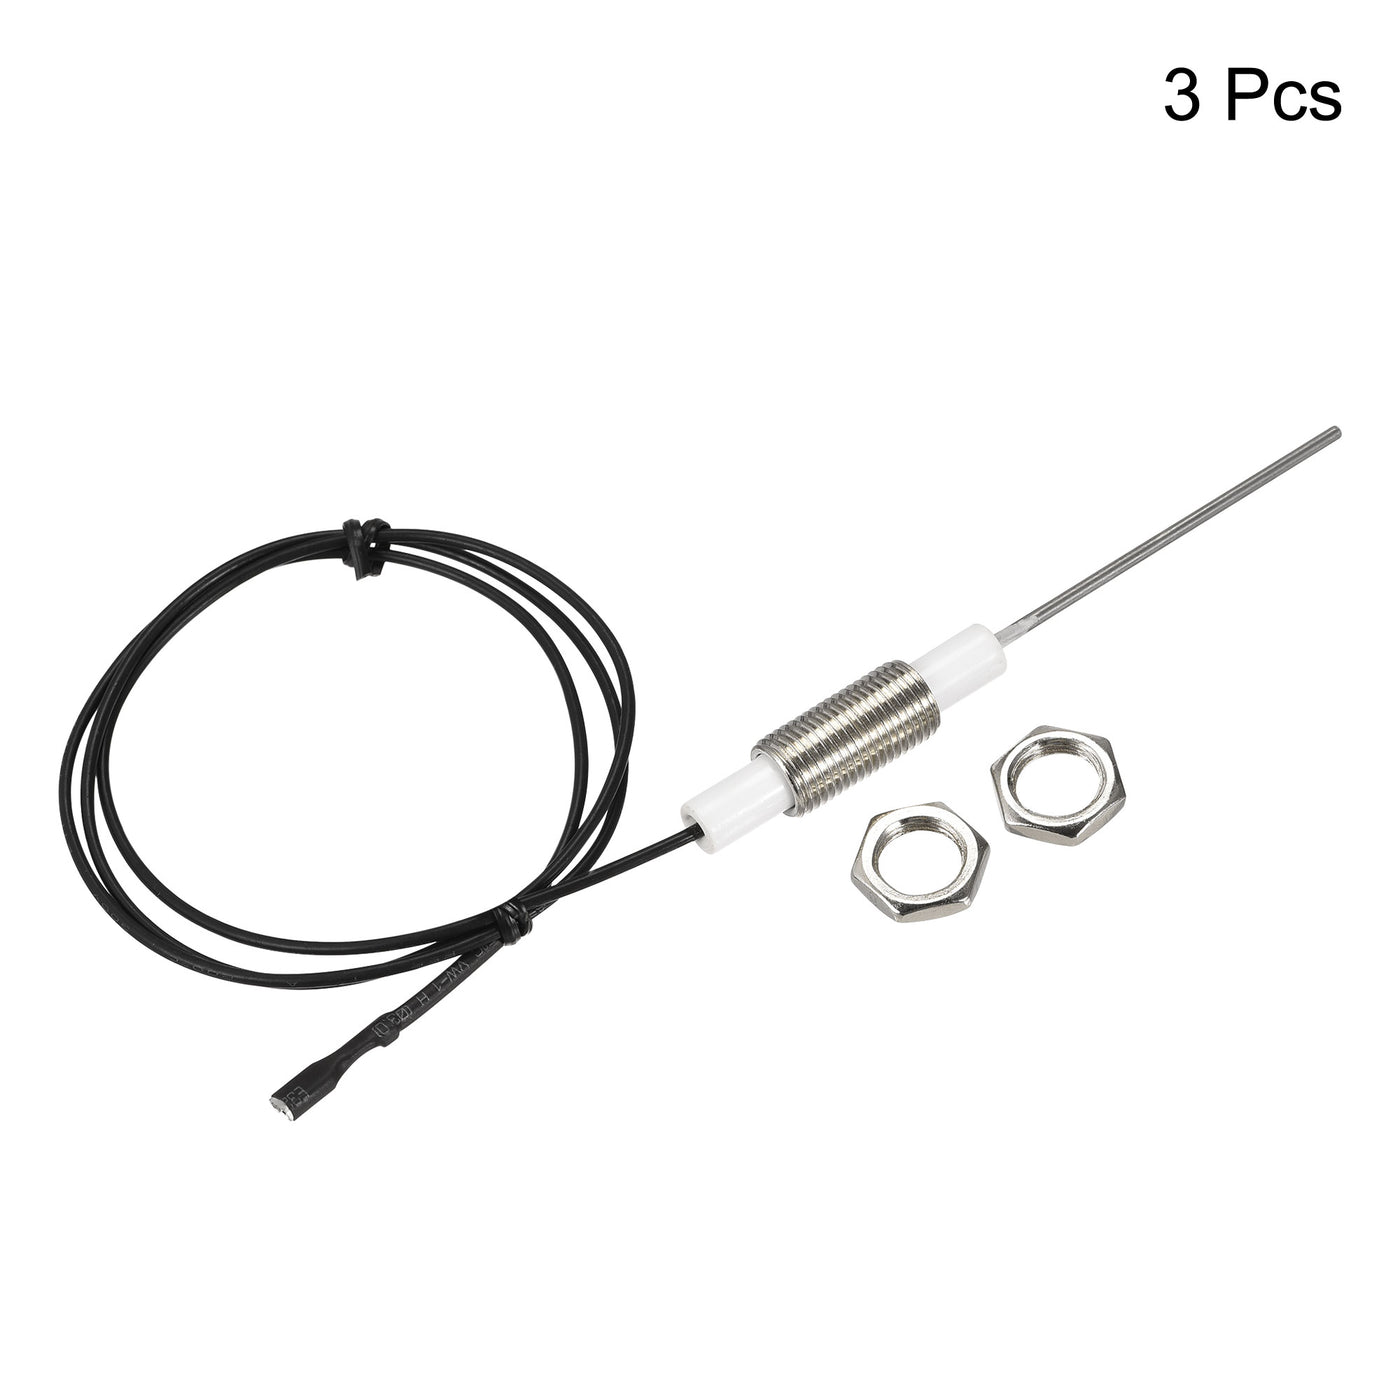 uxcell Uxcell Ignitor Wire Ceramic Electrode Assembly 600mm Length Gas Grill Ignitor Wire Ignition Electrode Replacement 3pcs